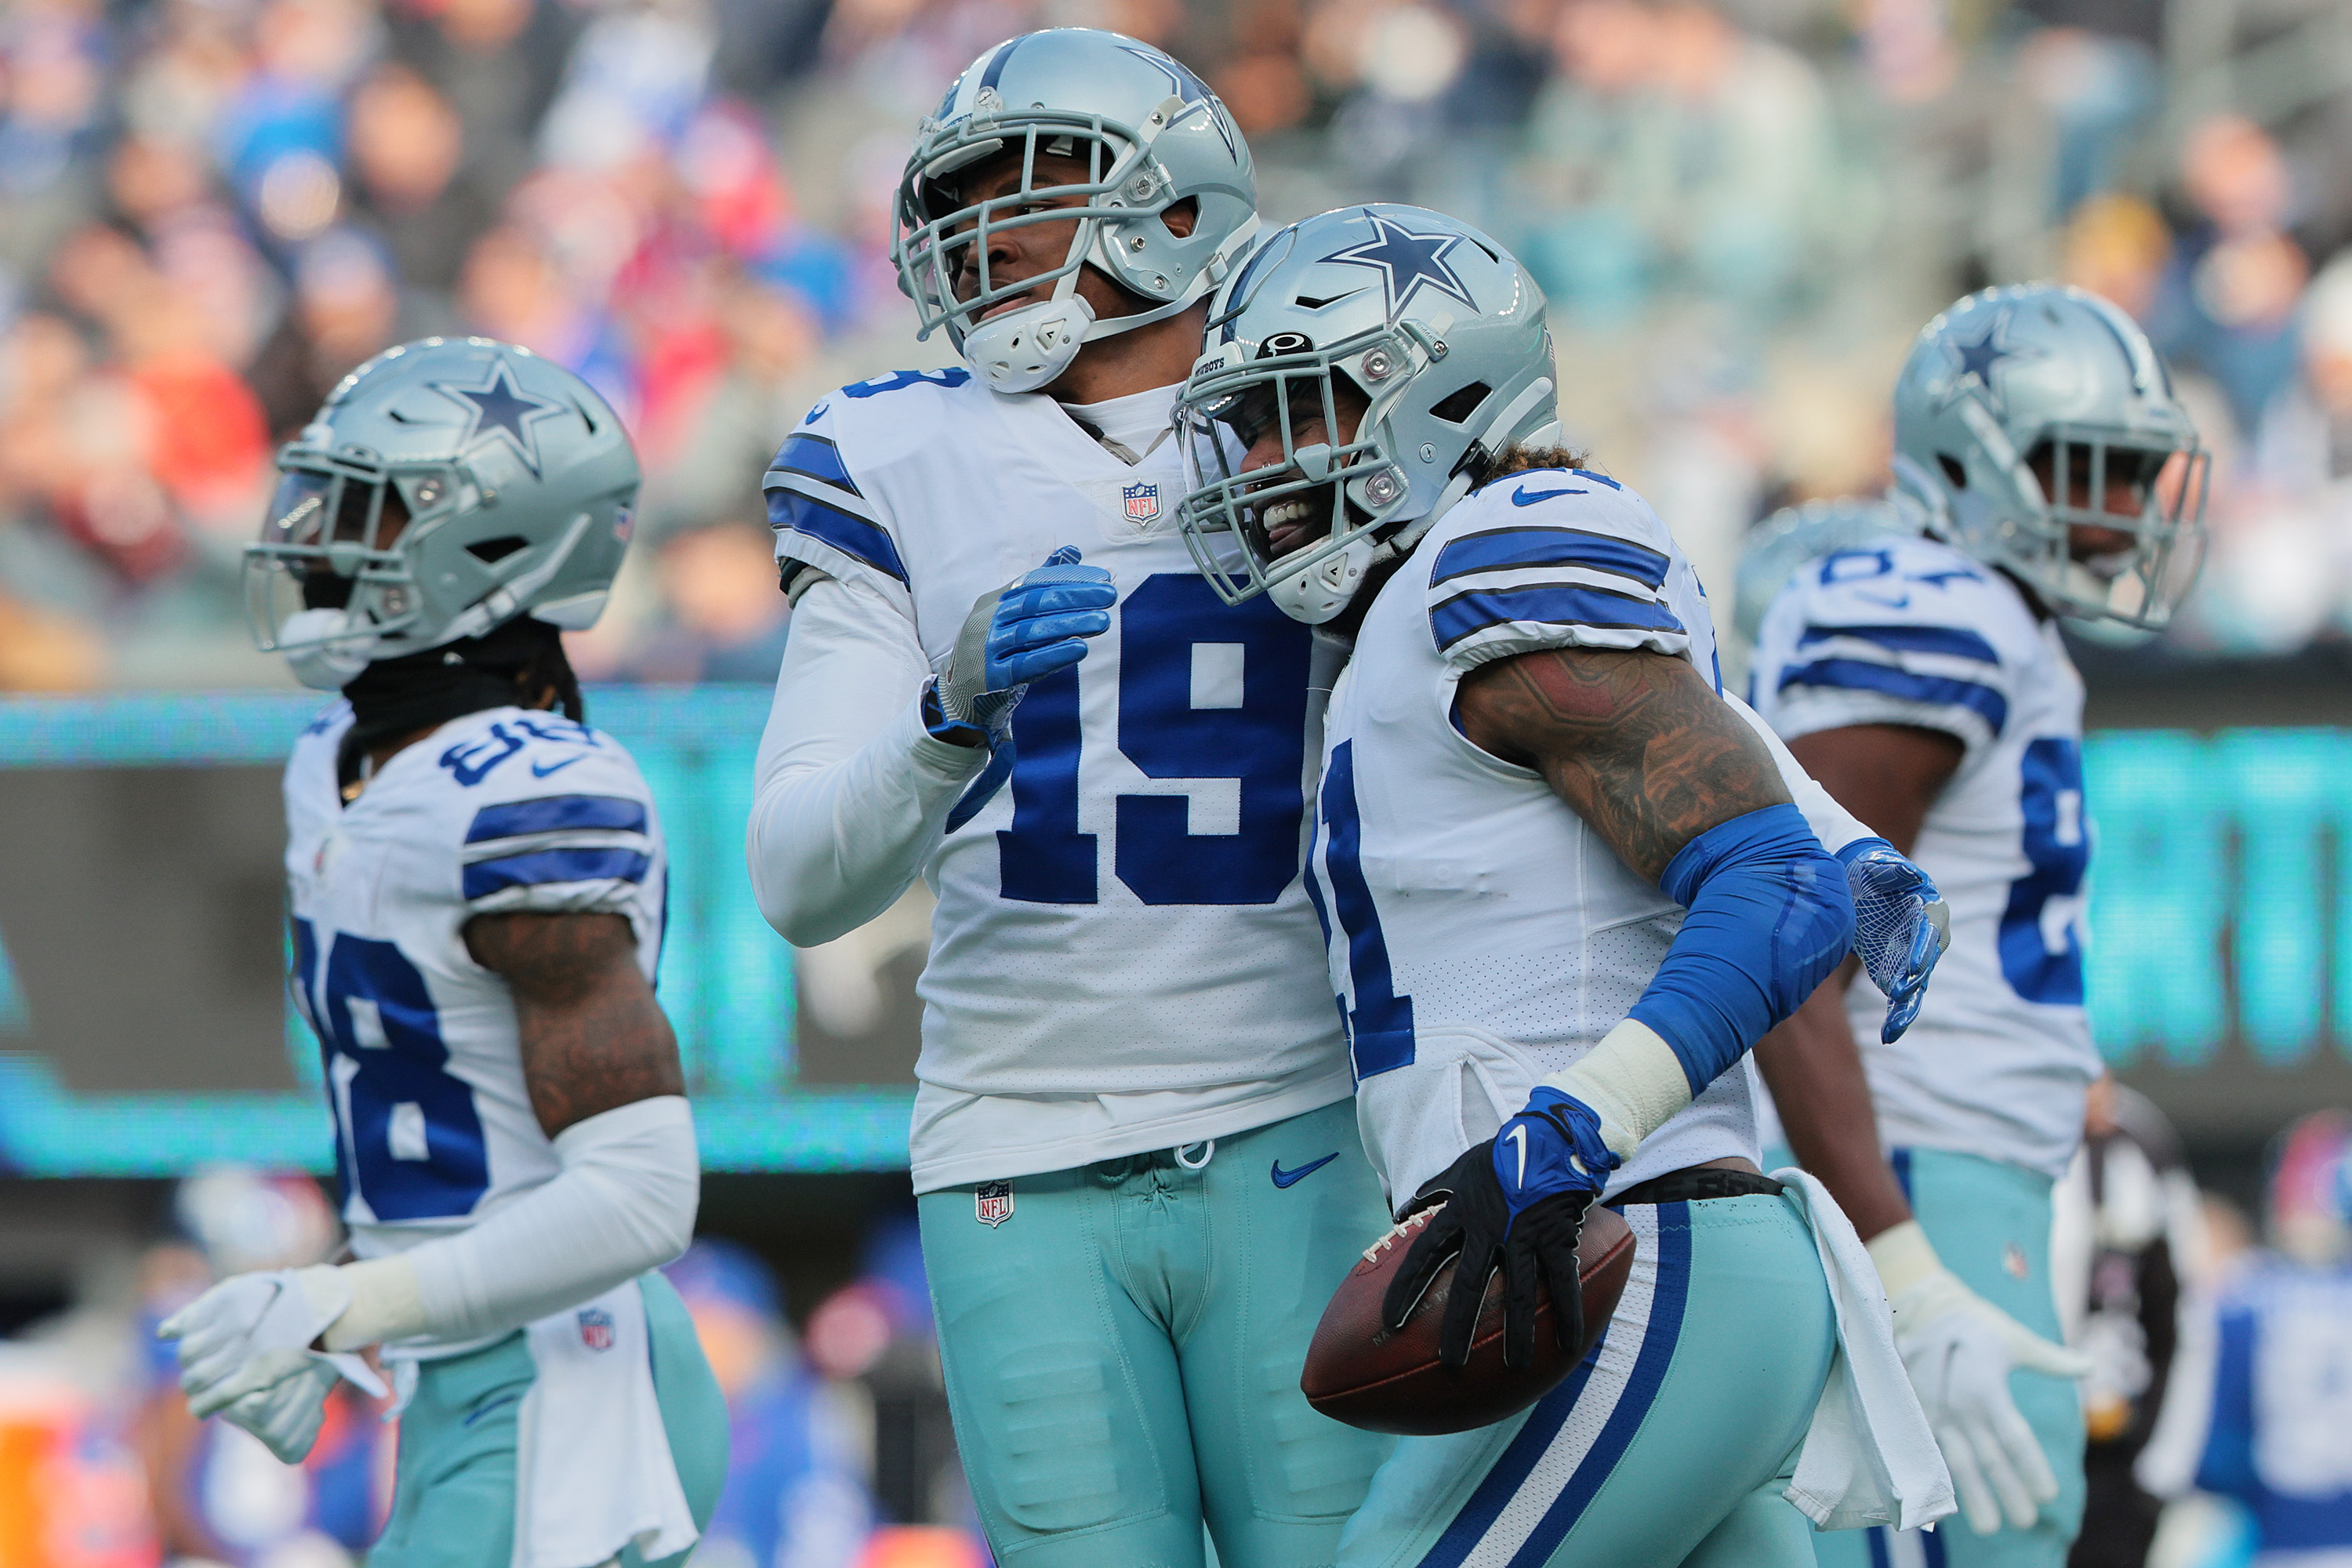 The Dallas Cowboys are currently the No. 2 seed in the NFC Playoffs